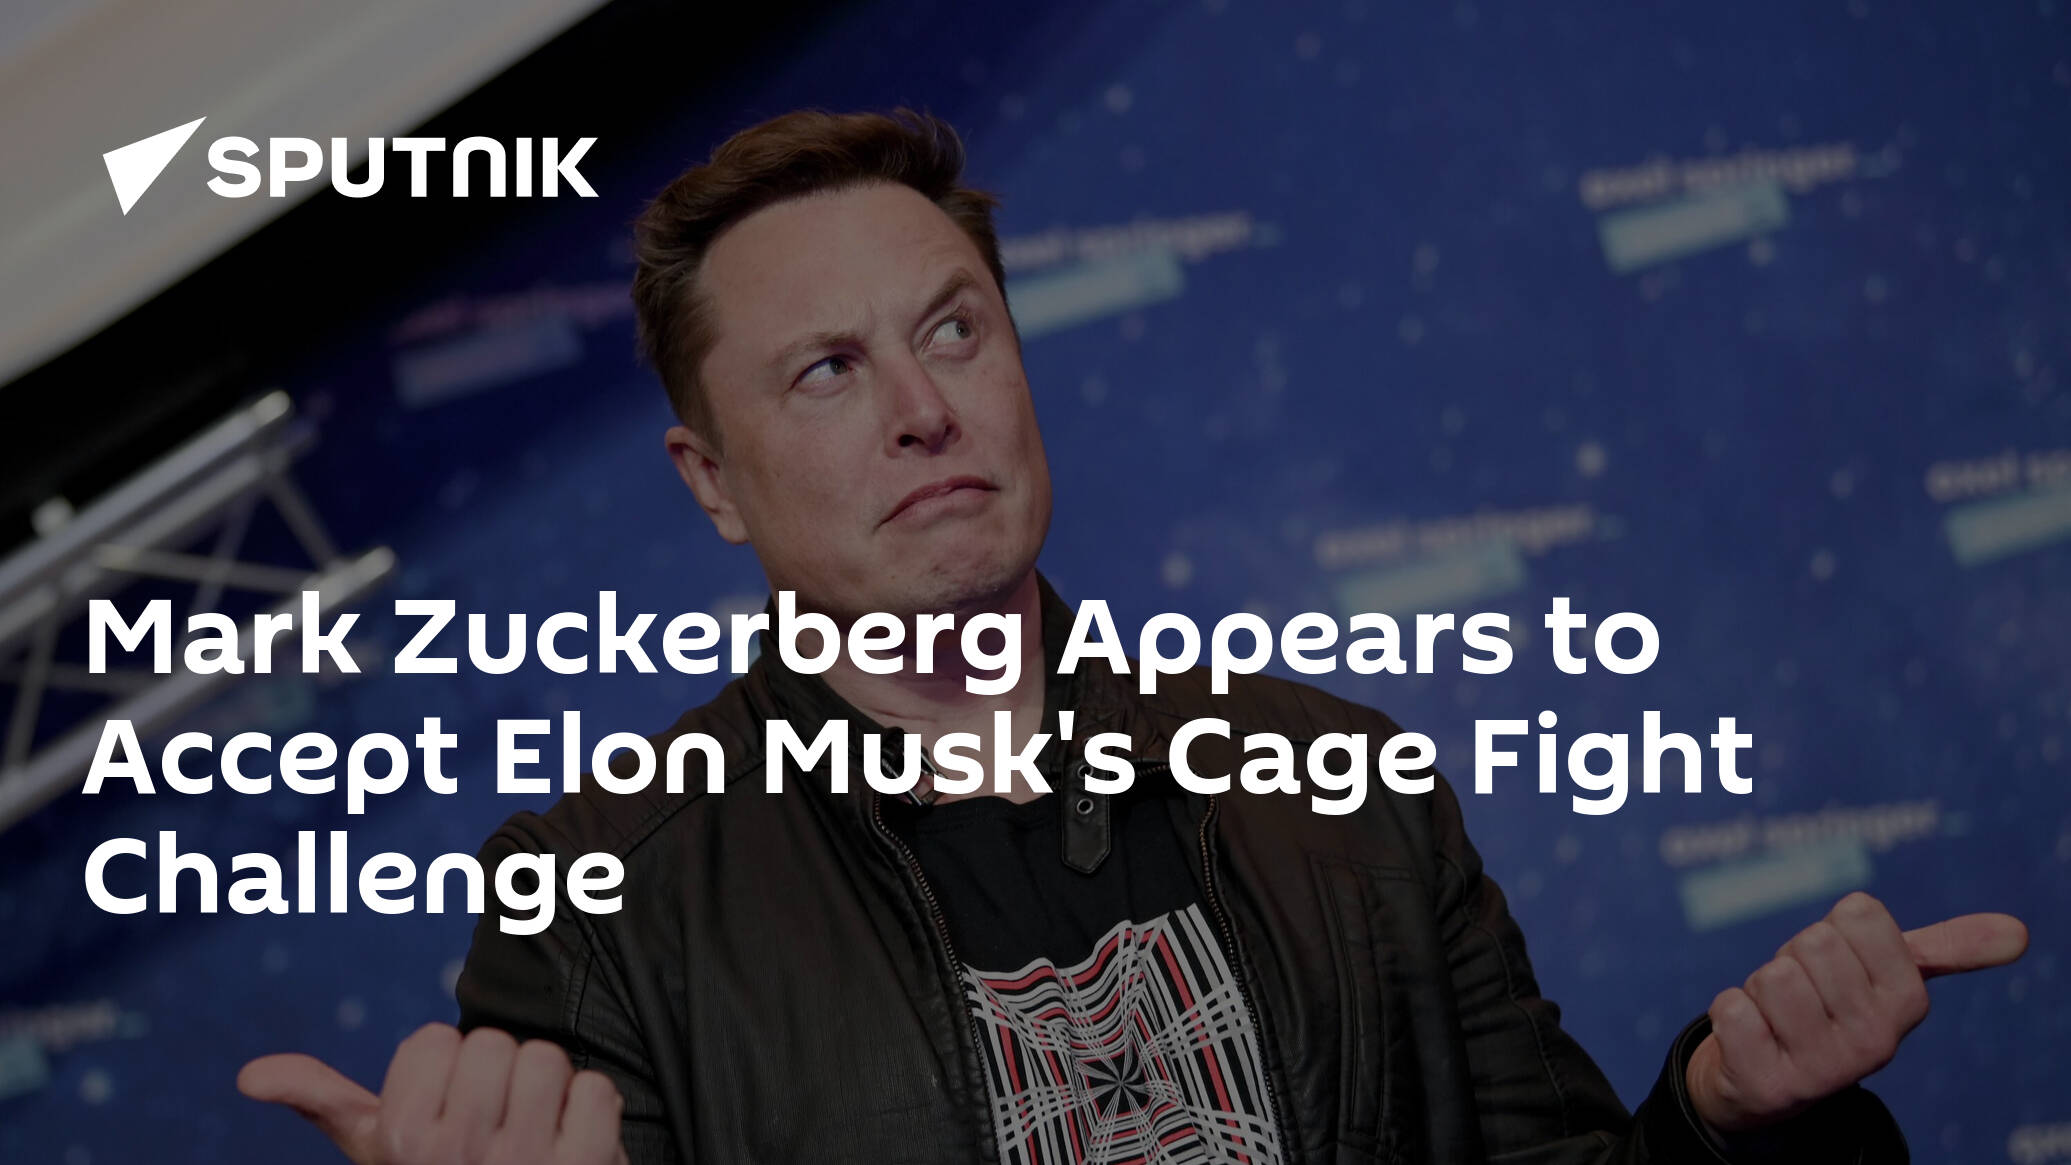 Mark Zuckerberg Appears to Accept Elon Musk's Cage Fight Challenge